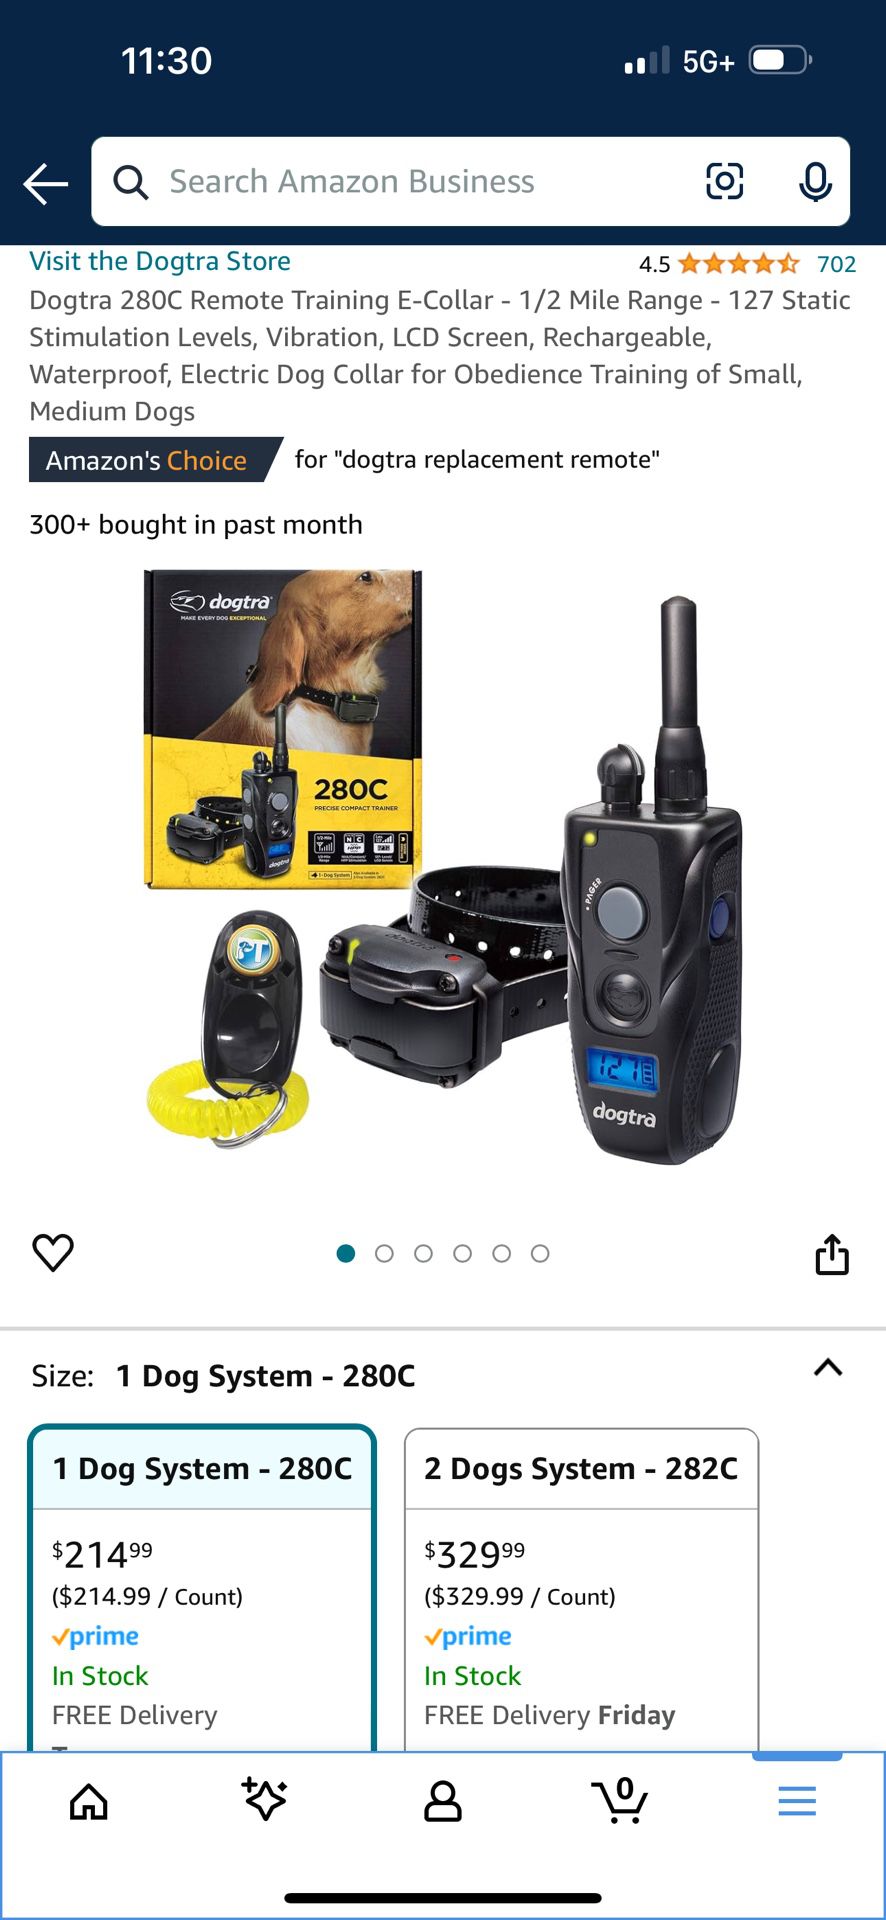 dogtra 280c remote training e-collar Used for about three weeks and sat in the closet for a year. Will be charged to show it works